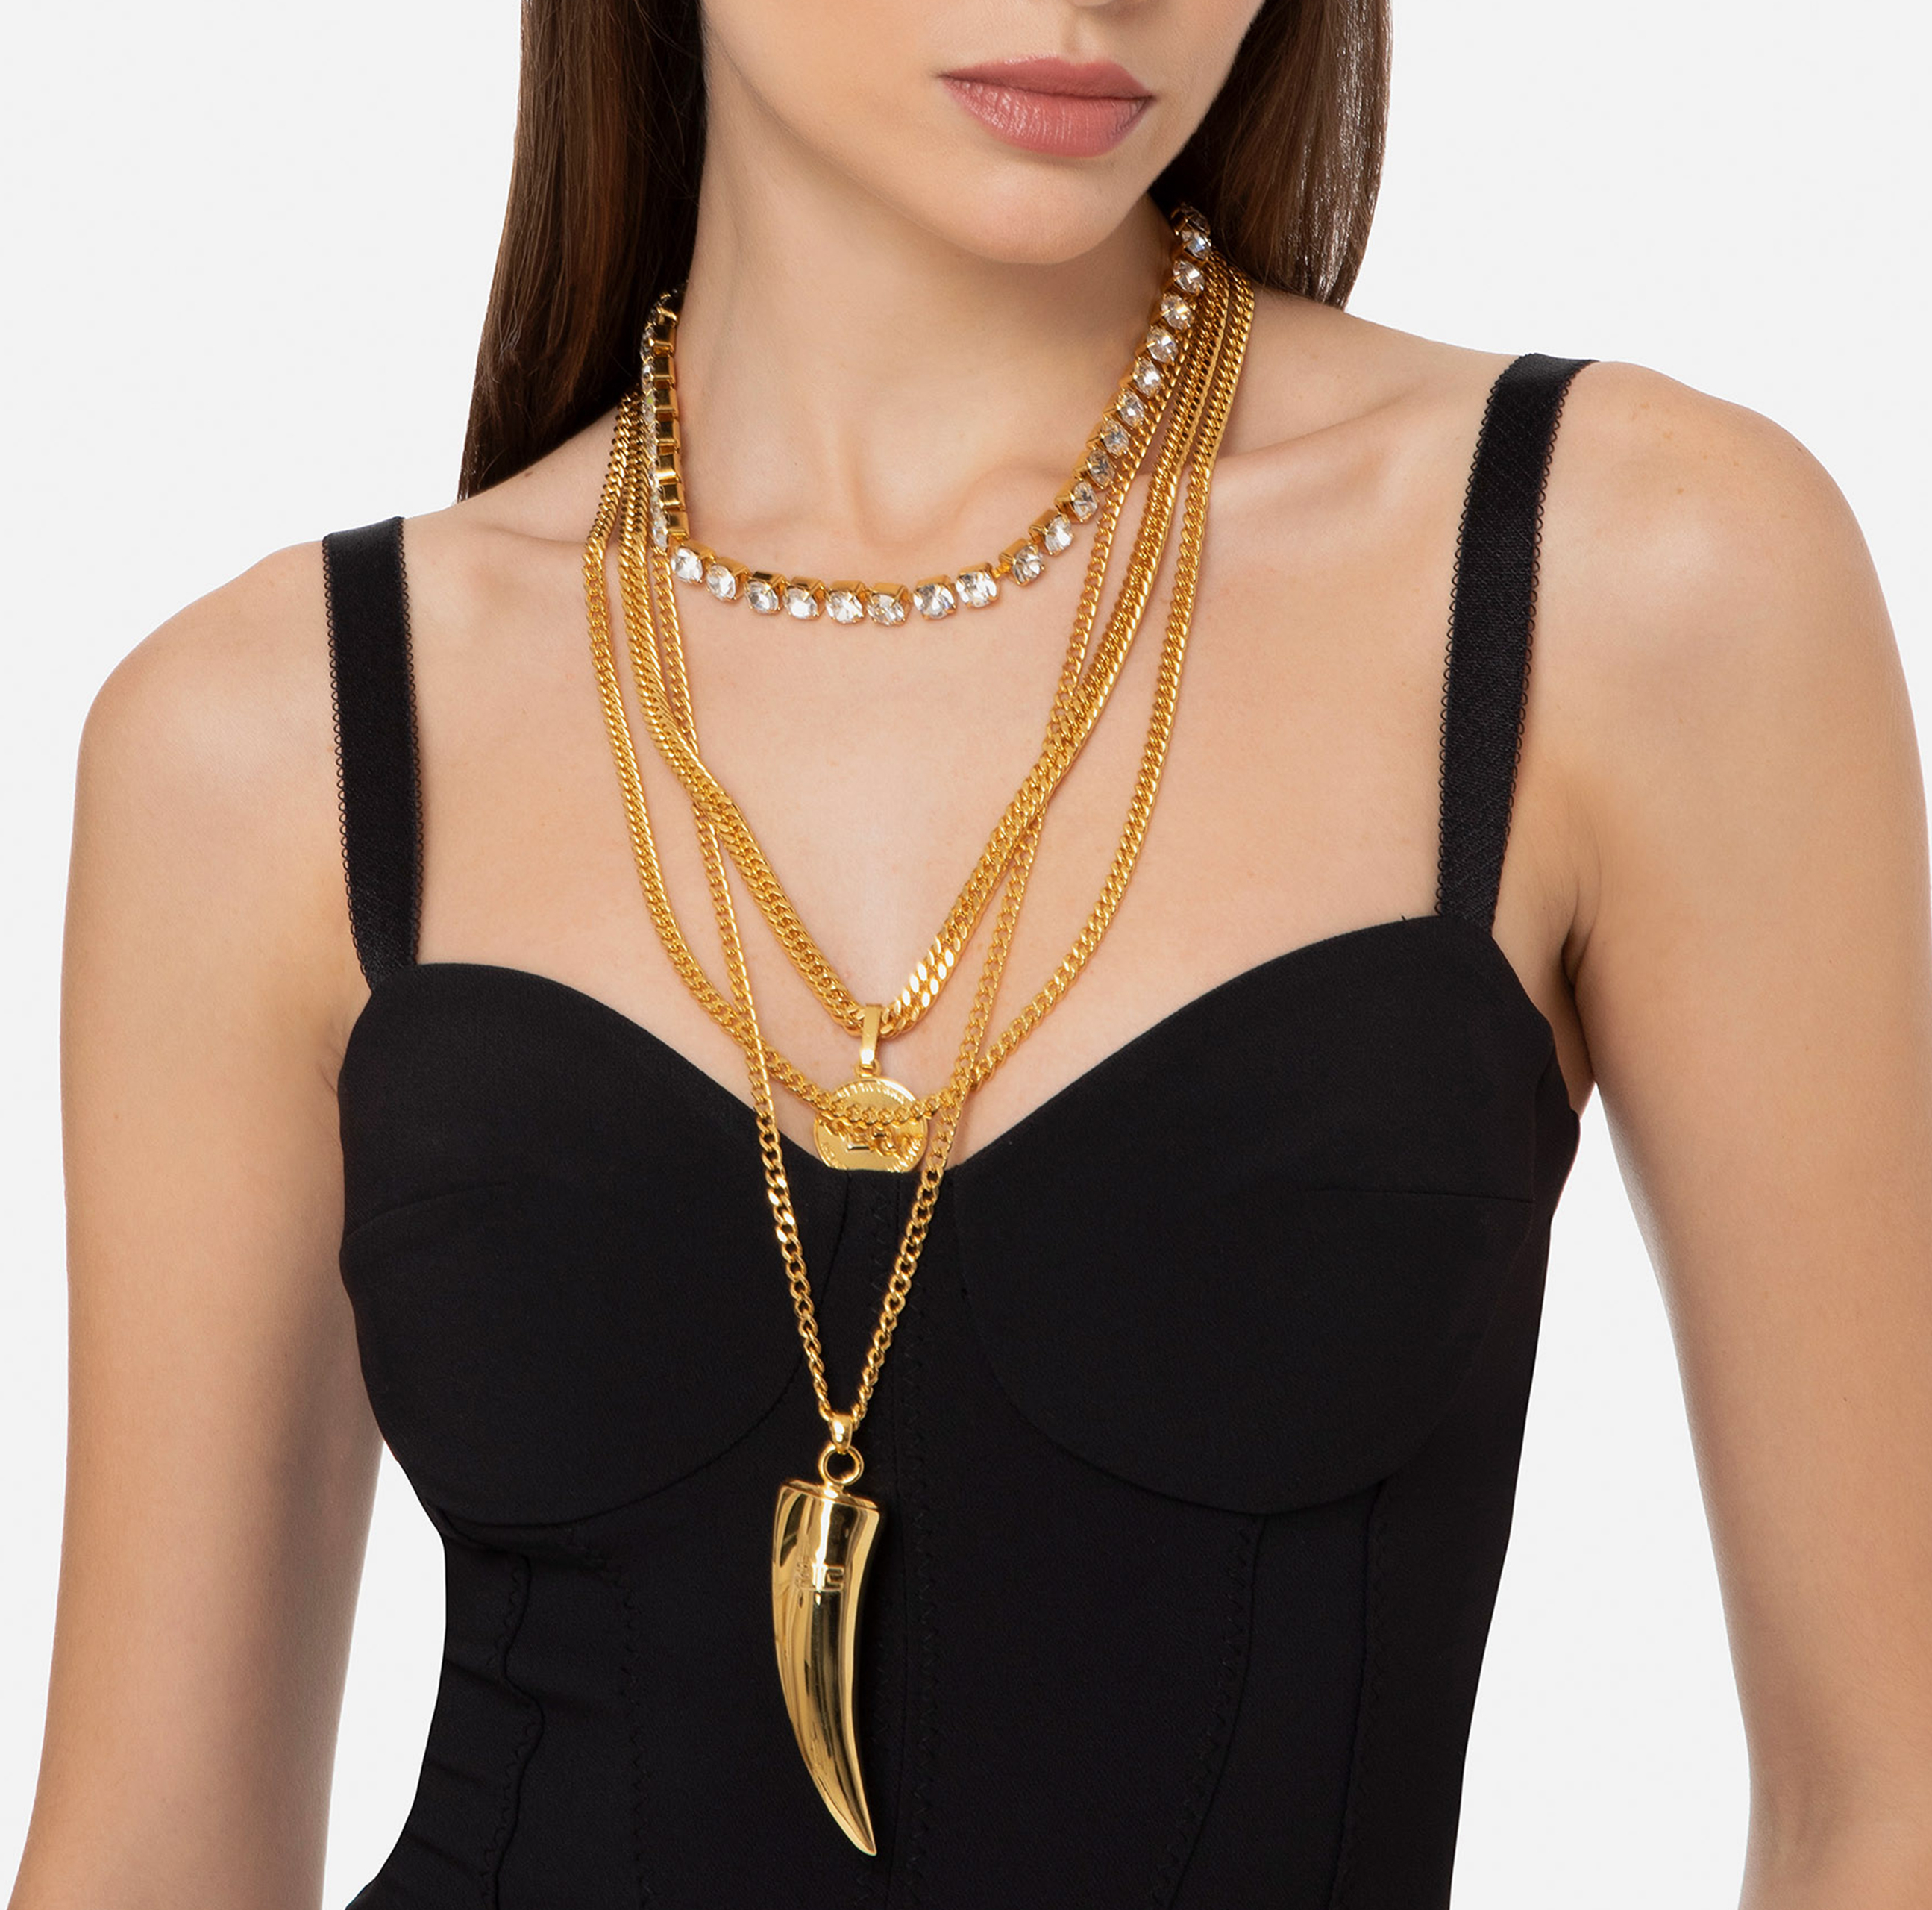 Long necklace with charms in gold color - Elisabetta Franchi